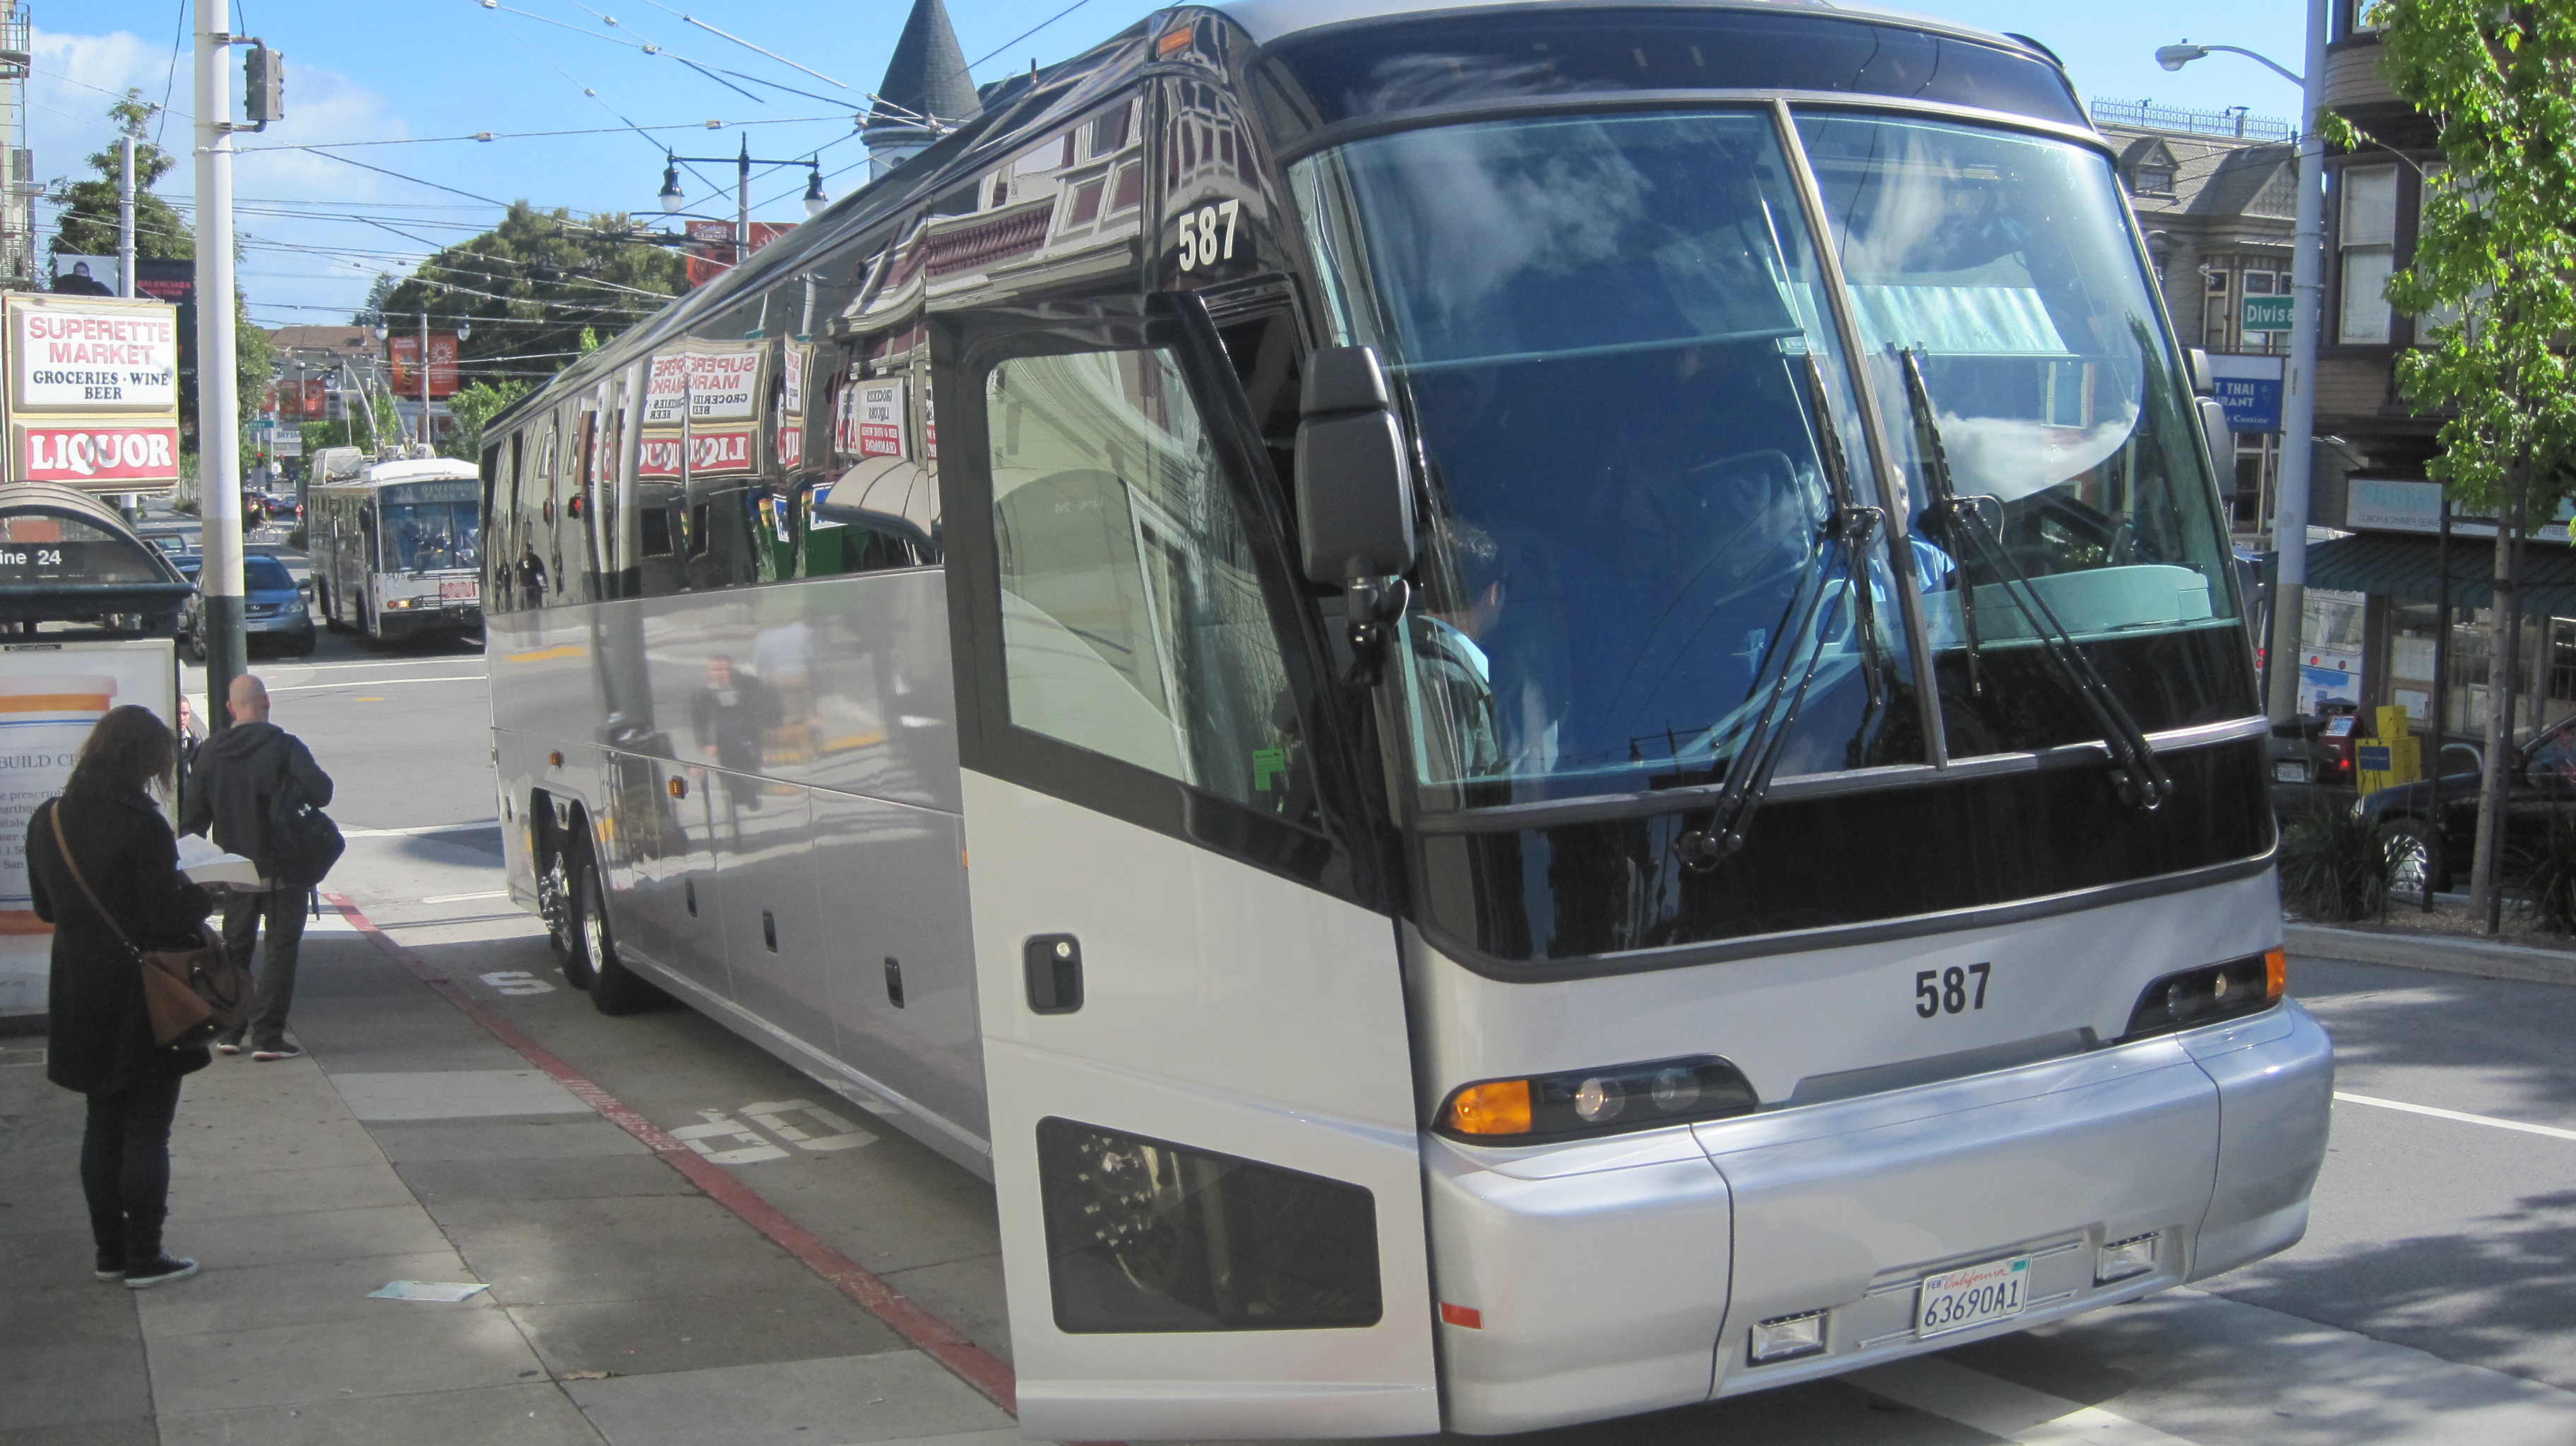 Google, Apple shuttle buses attacked by unidentified entity.